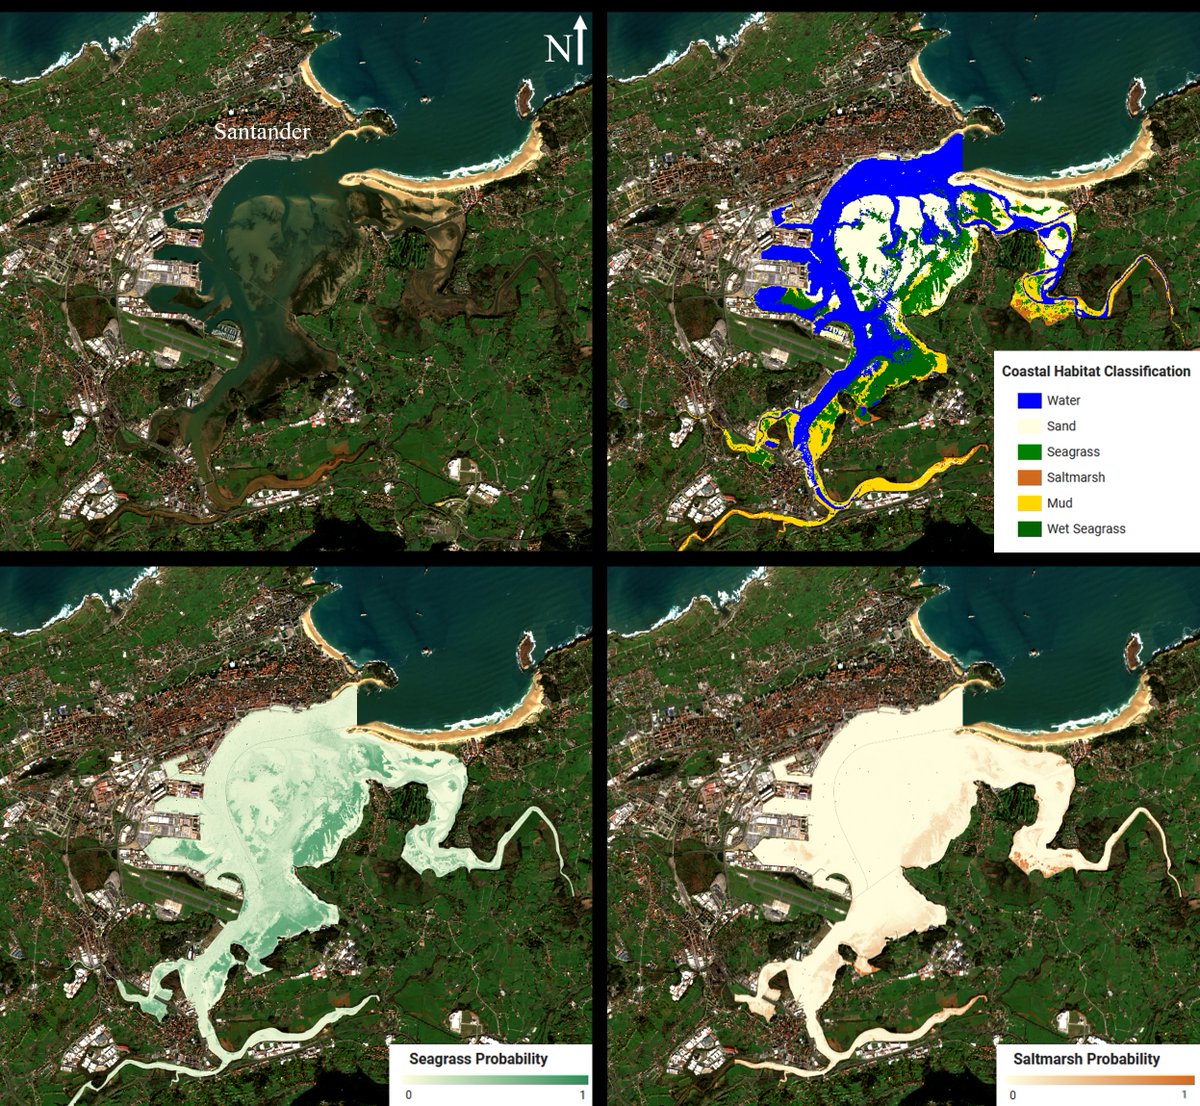 Harnessing the power of Earth Observation and Machine Learning to study Seagrass Ecosystem Services .Check out our results using Random Forest for: Coastal Habitat Classification and Seagrass-Saltmarsh Probability in #Santander Bay! 🗺️ #MarshAProject 👀👉marsha.ihcantabria.es